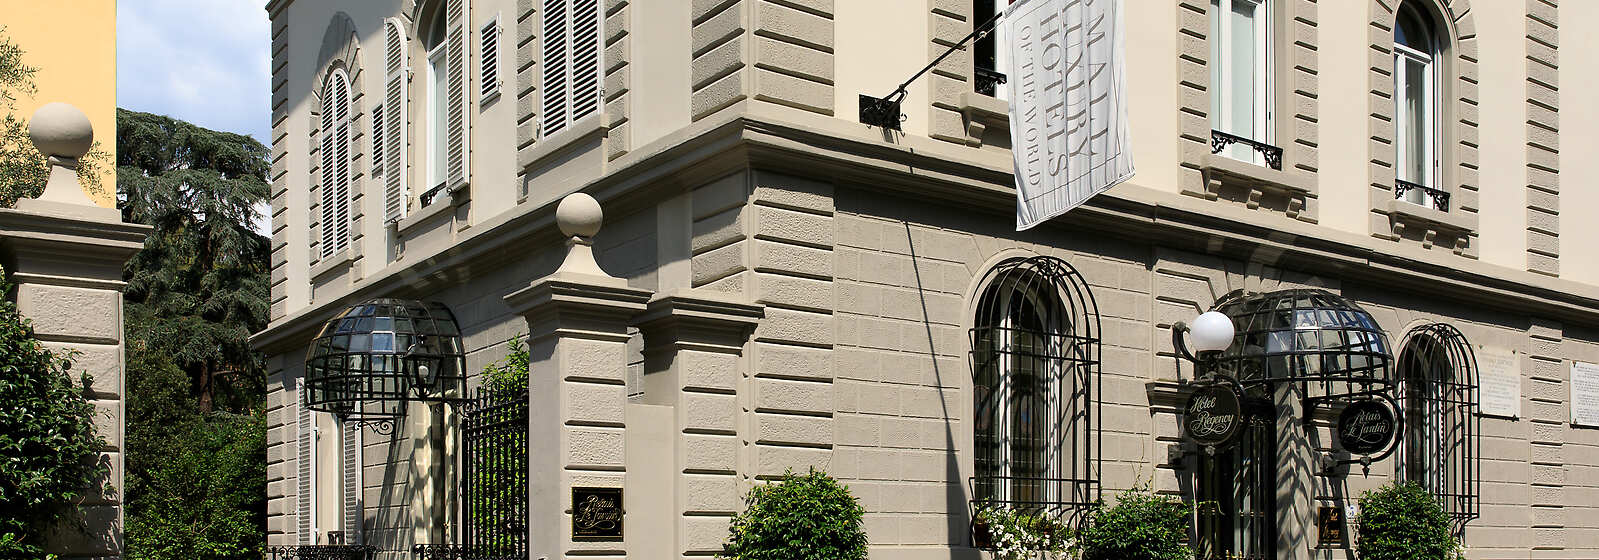 Hotel Regency, Firenze: the fully renovated facades